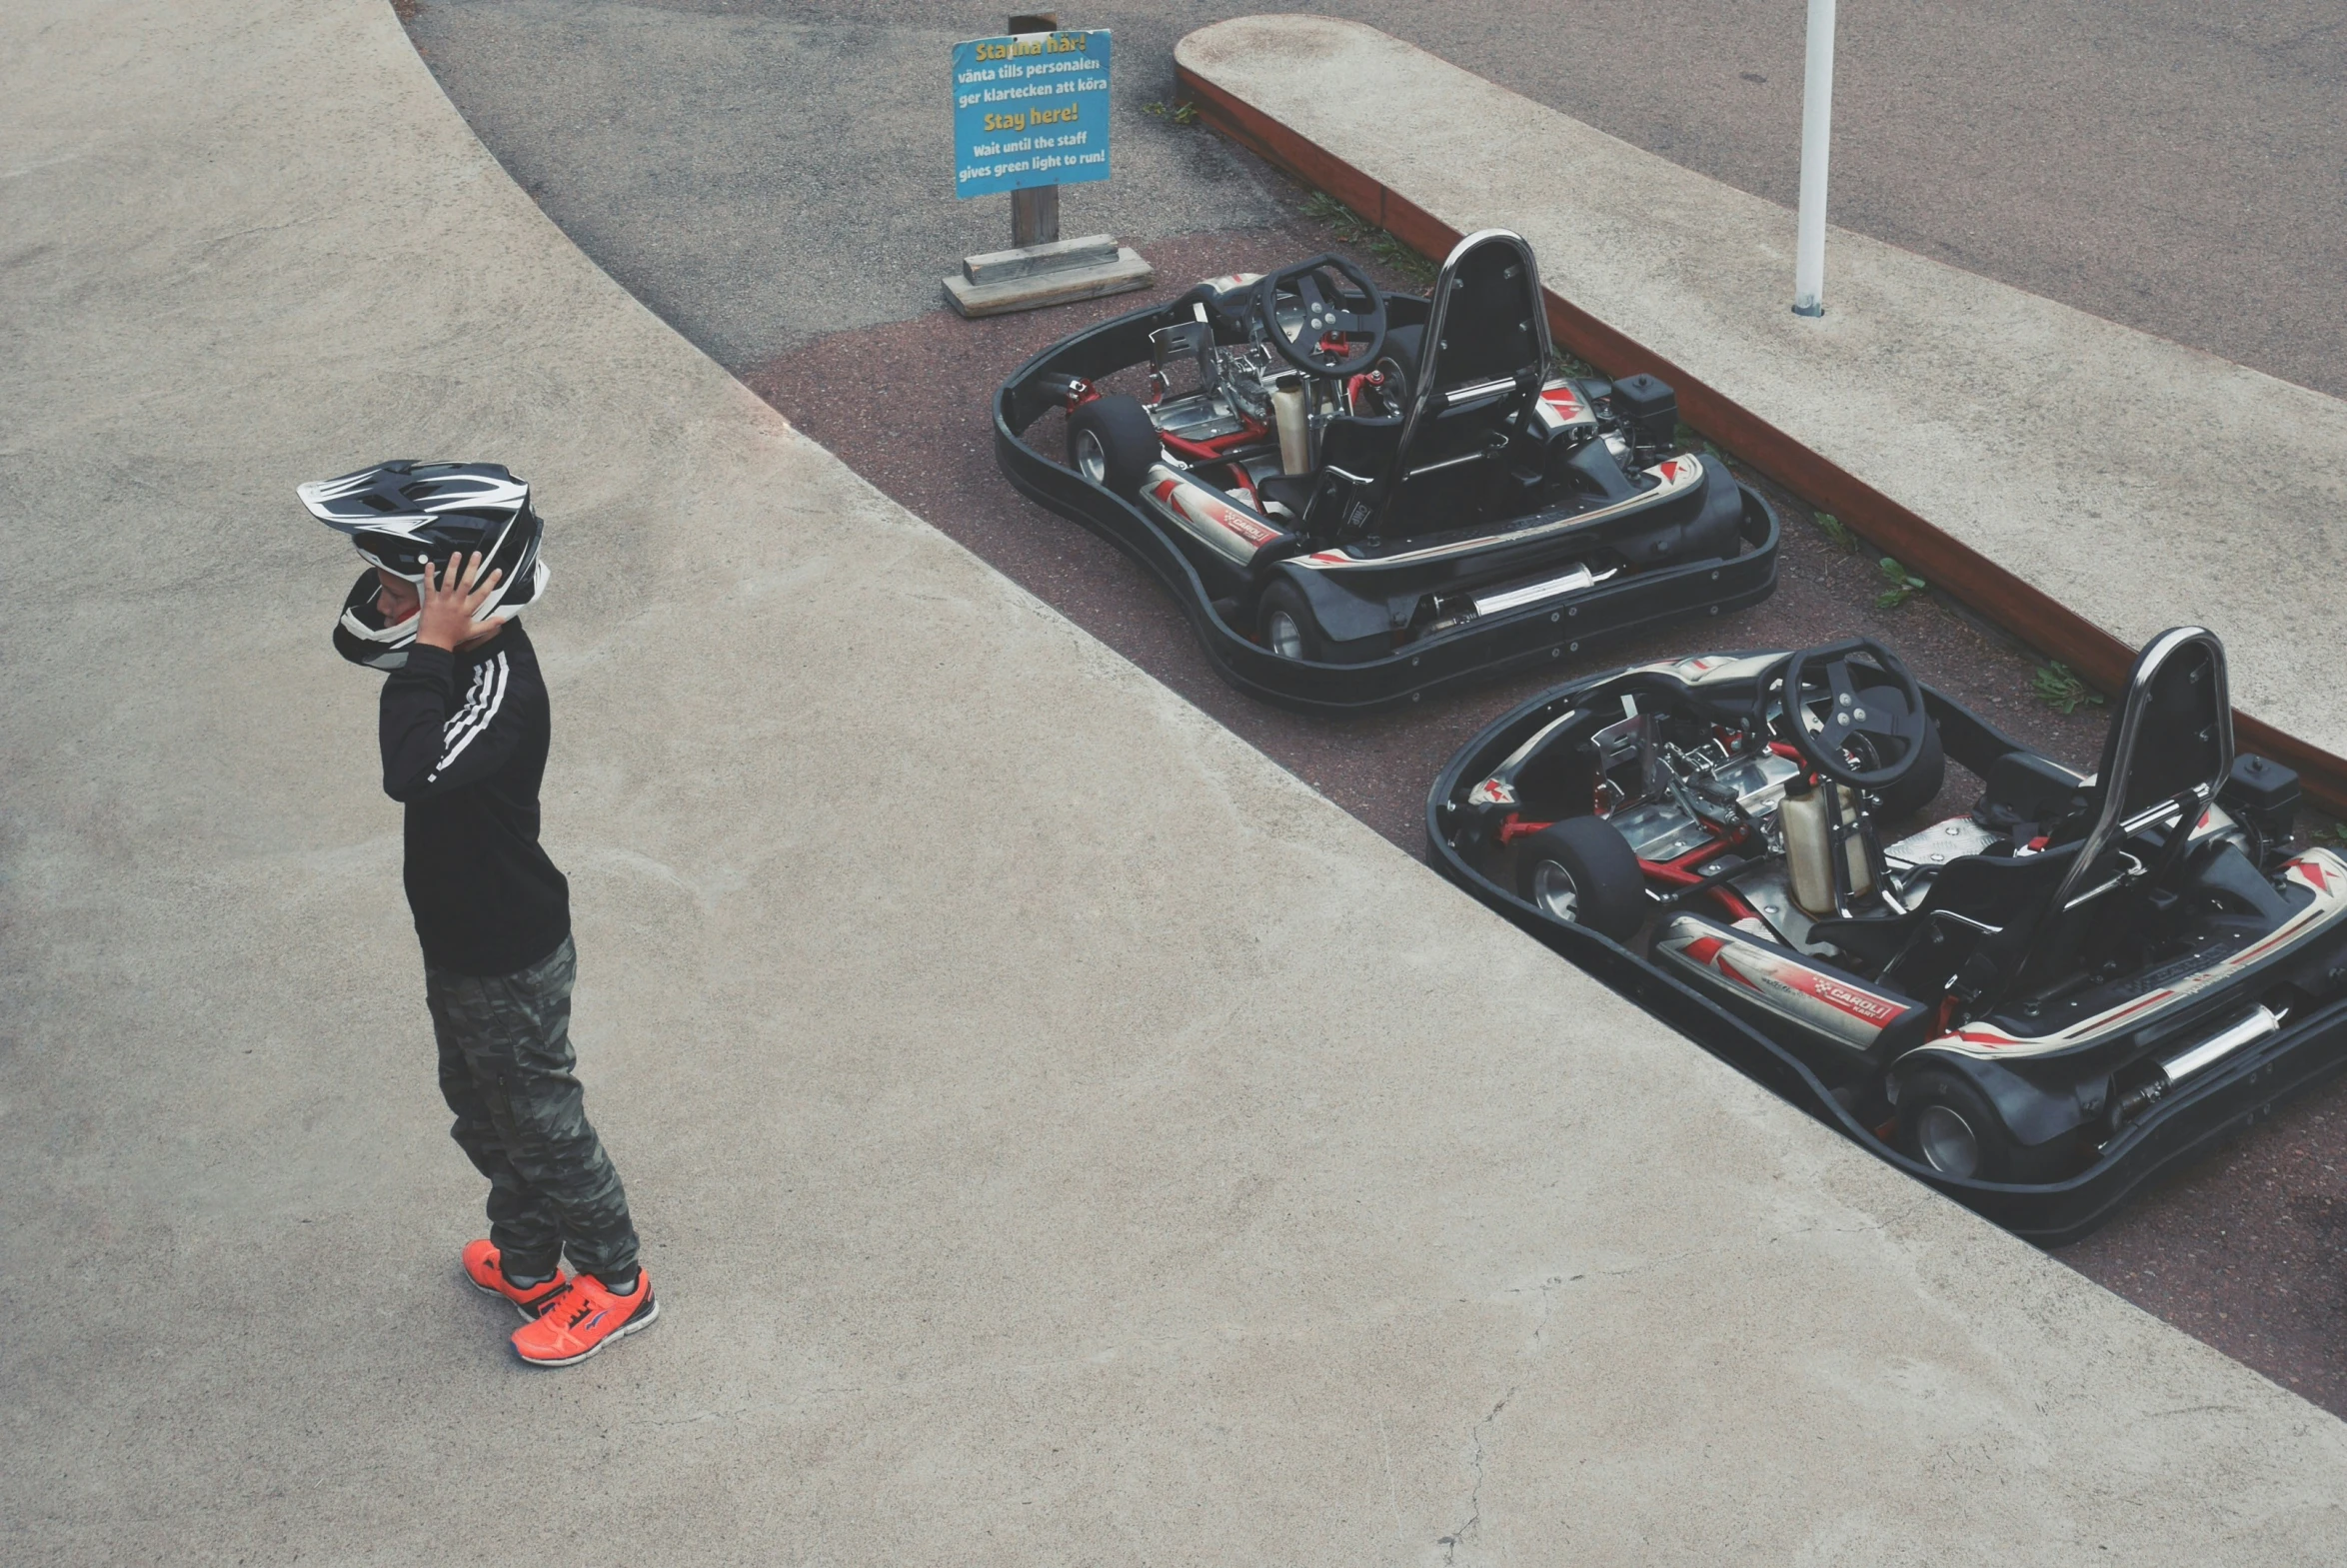 a small child on a skateboard looking at cars